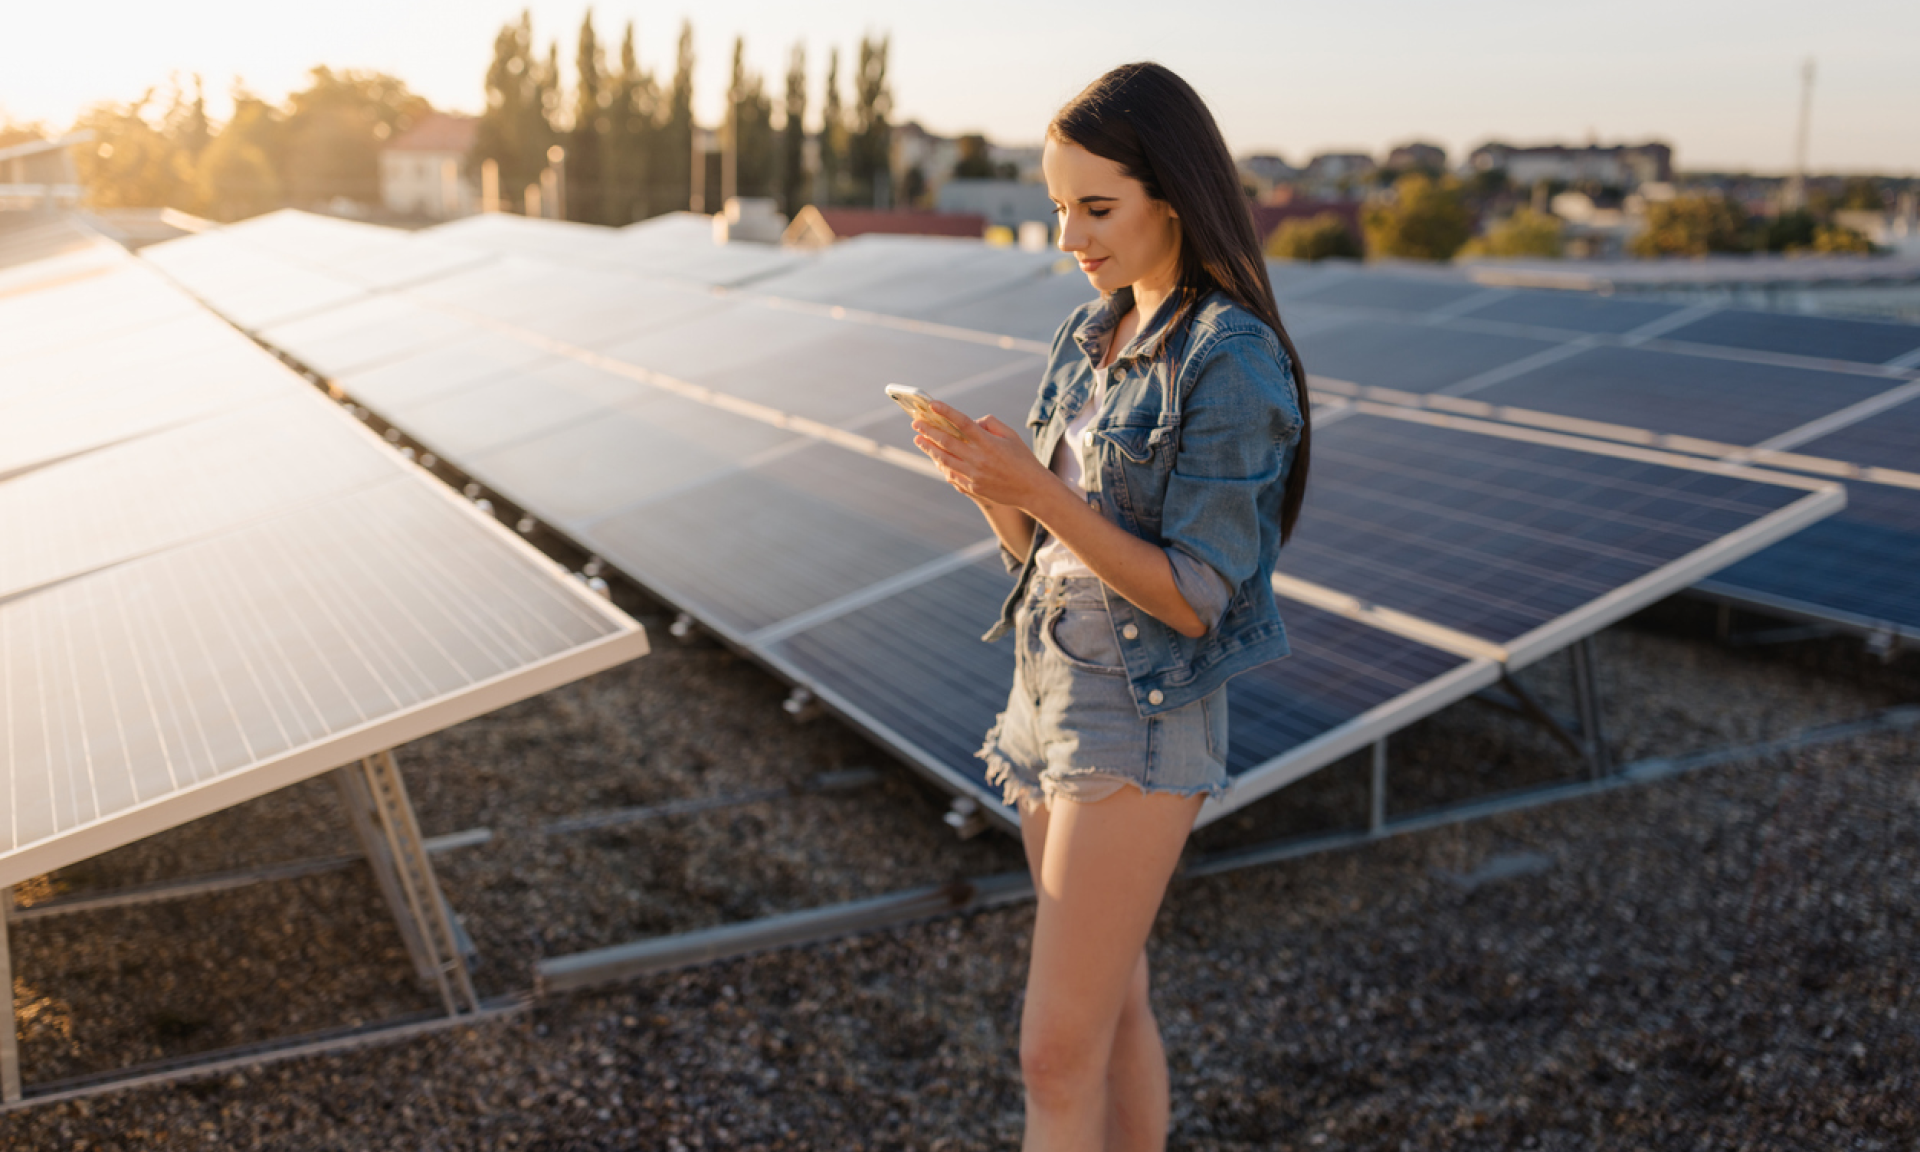 woman standing in front of solar panels